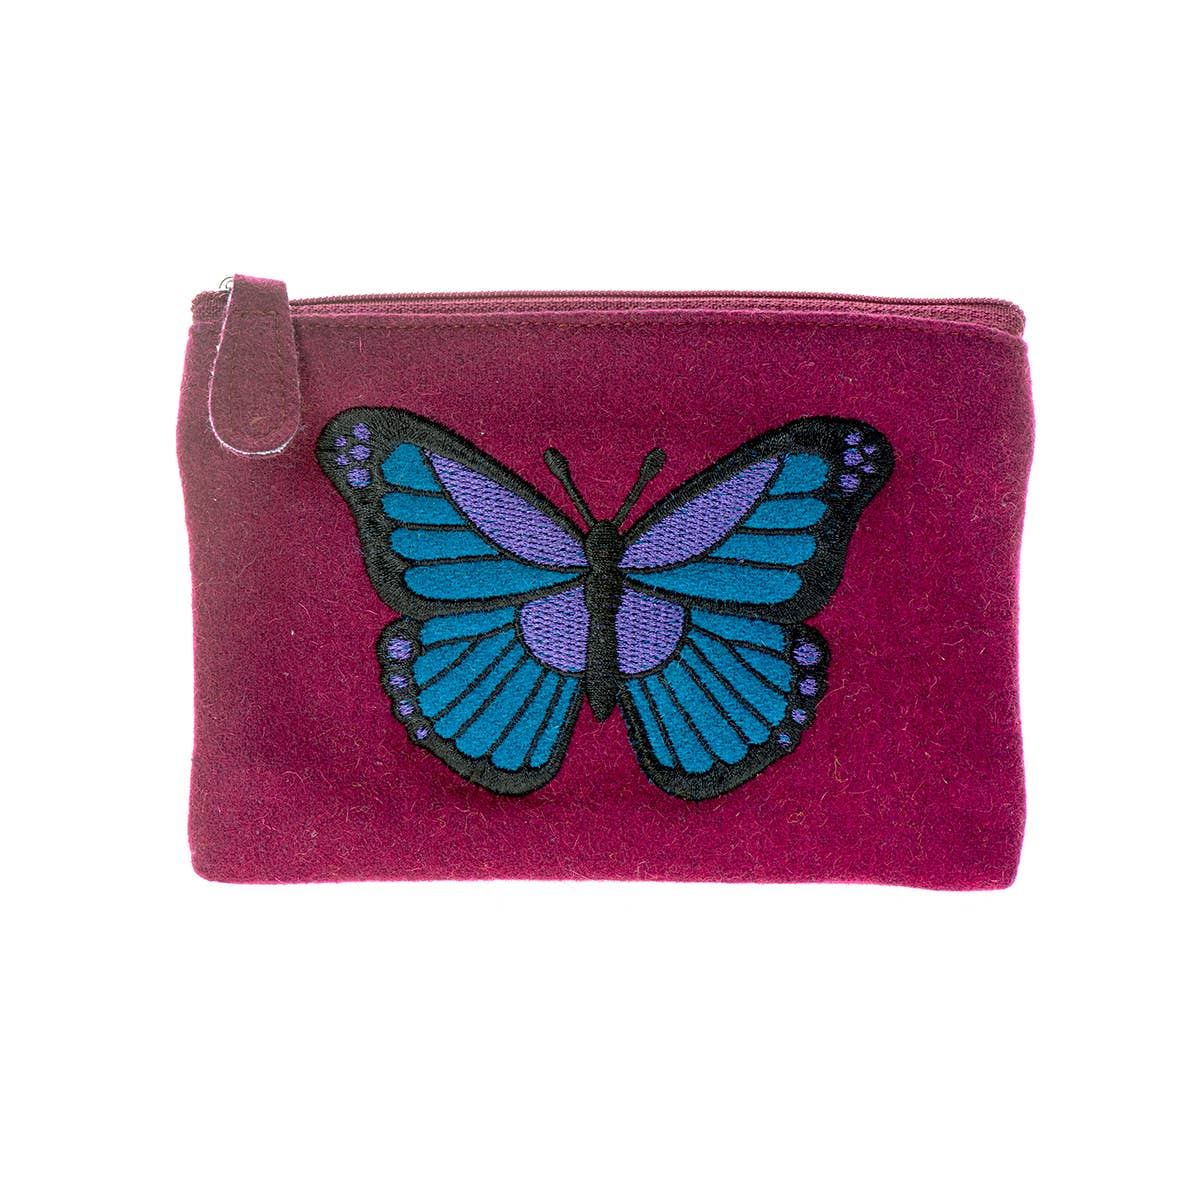 Butterfly Coin Purse (Plum) | Just Trade WorldFinds